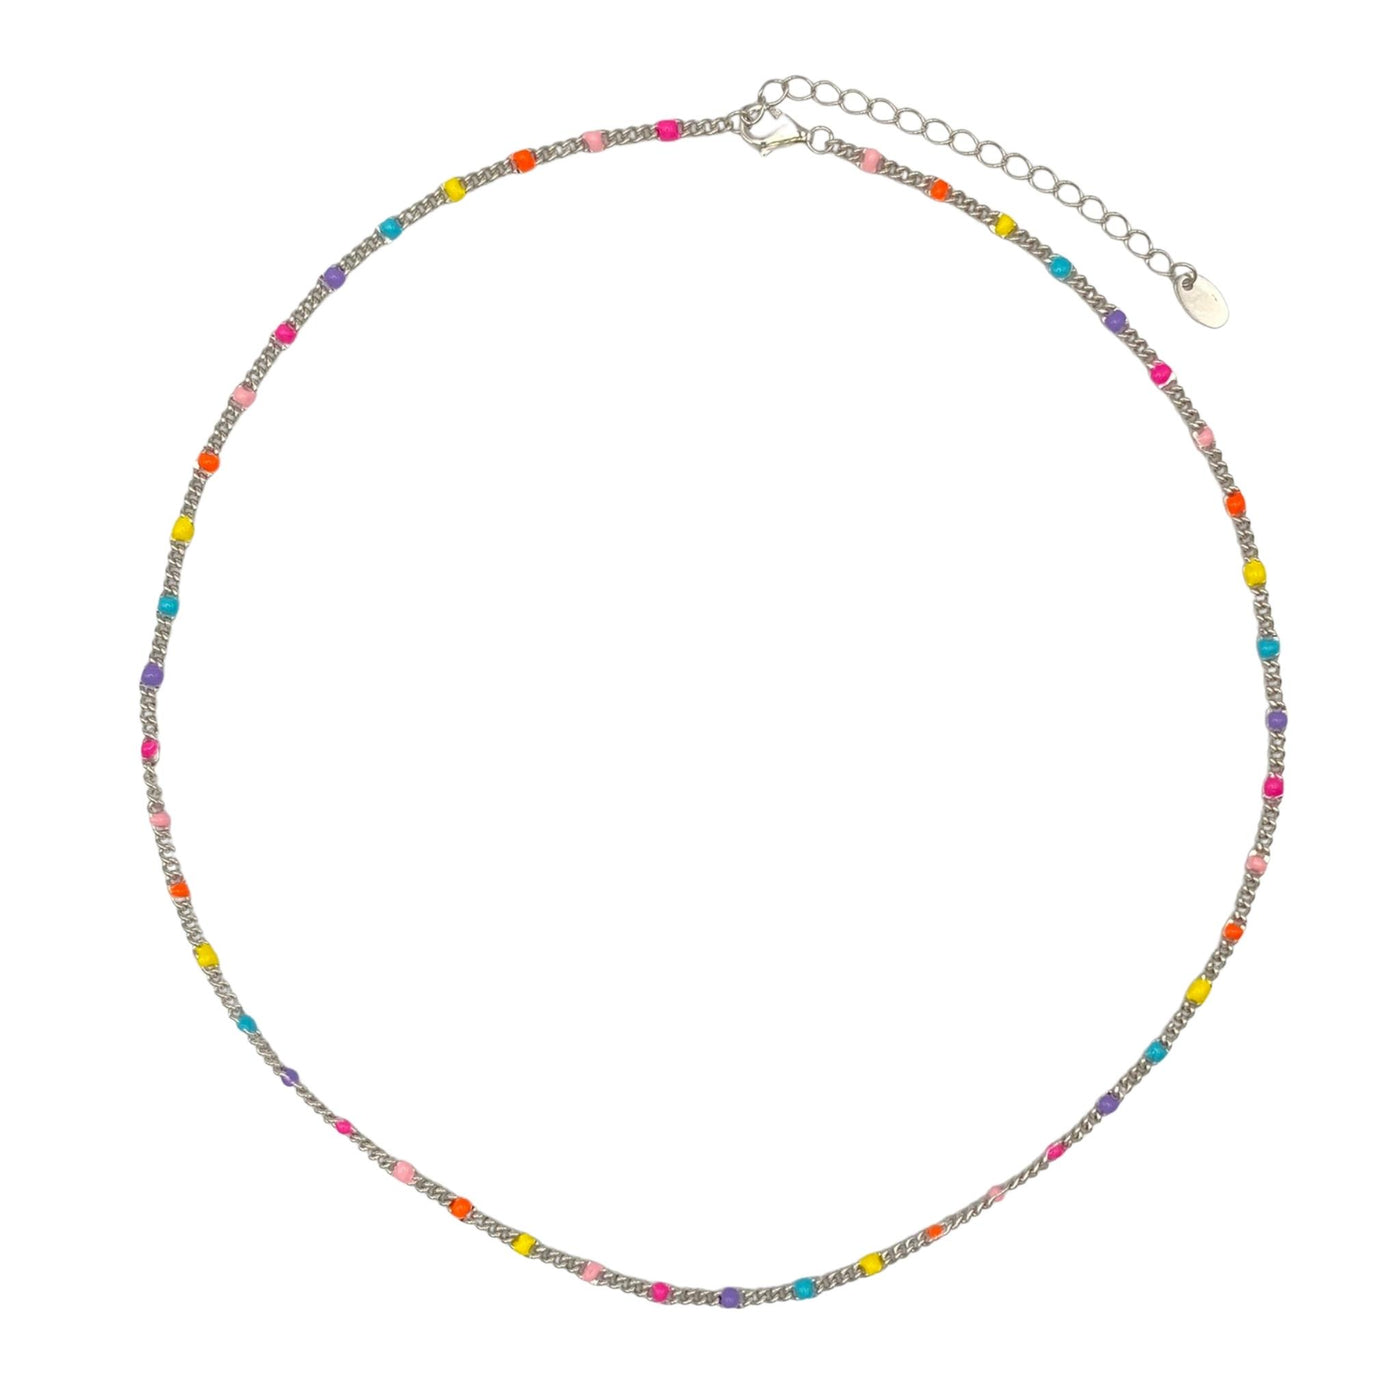 Silver chain necklace with colored enamel balls